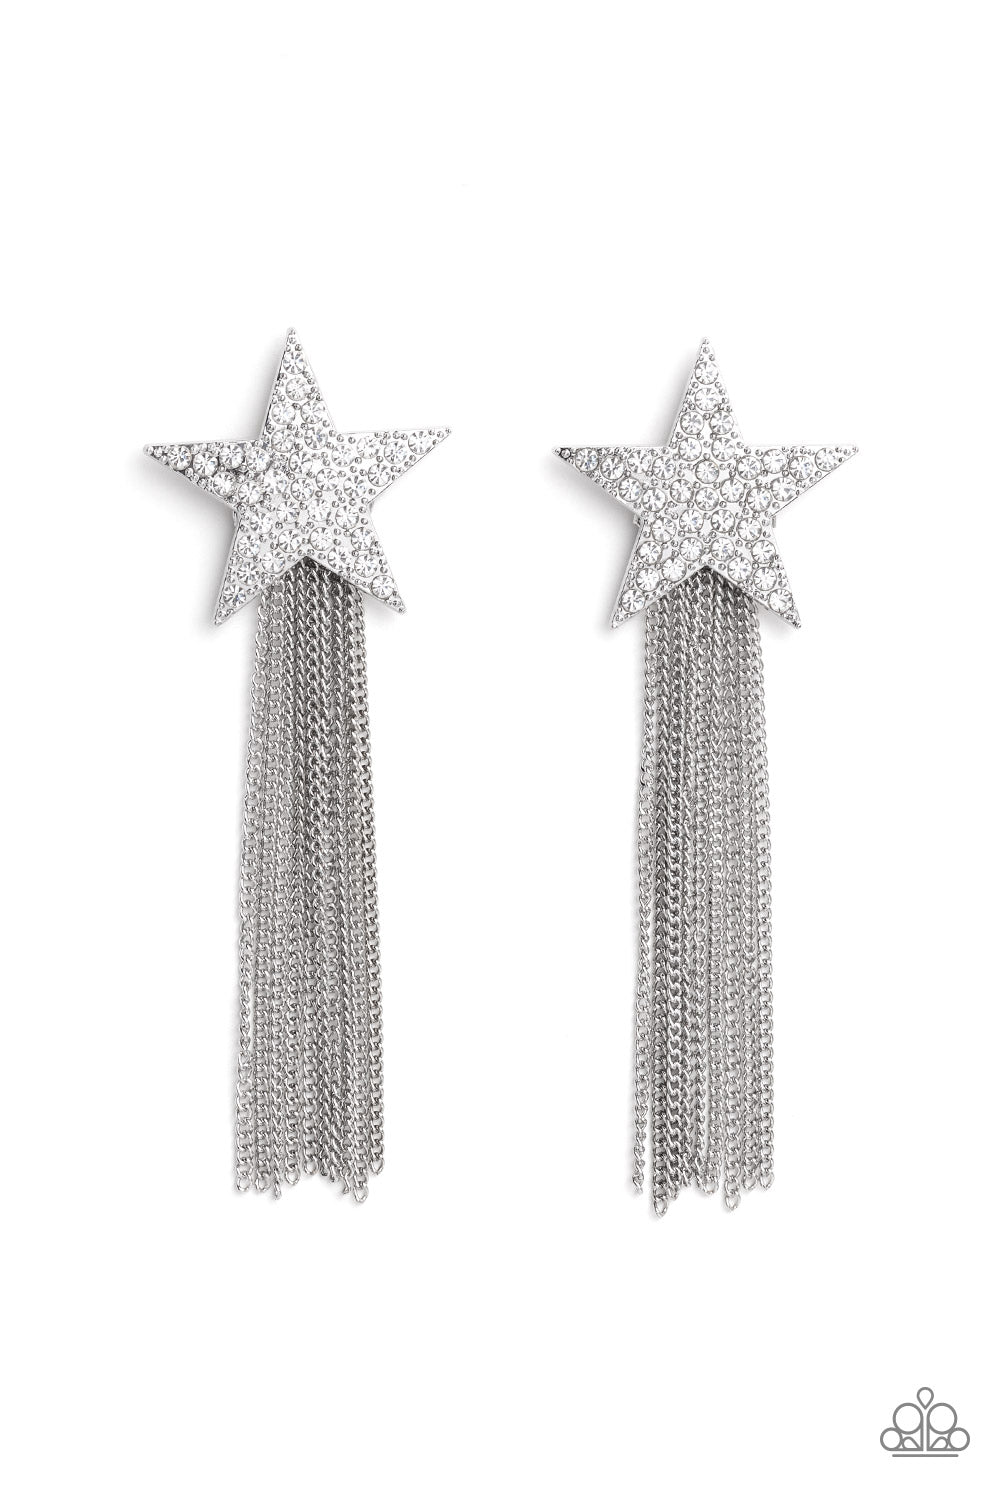 Superstar Solo - White and Silver Earrings - Paparazzi Accessories - A curtain of silver chains streams out from the bottom of an oversized silver star encrusted in blinding white rhinestones, resulting in a stellar tassel.